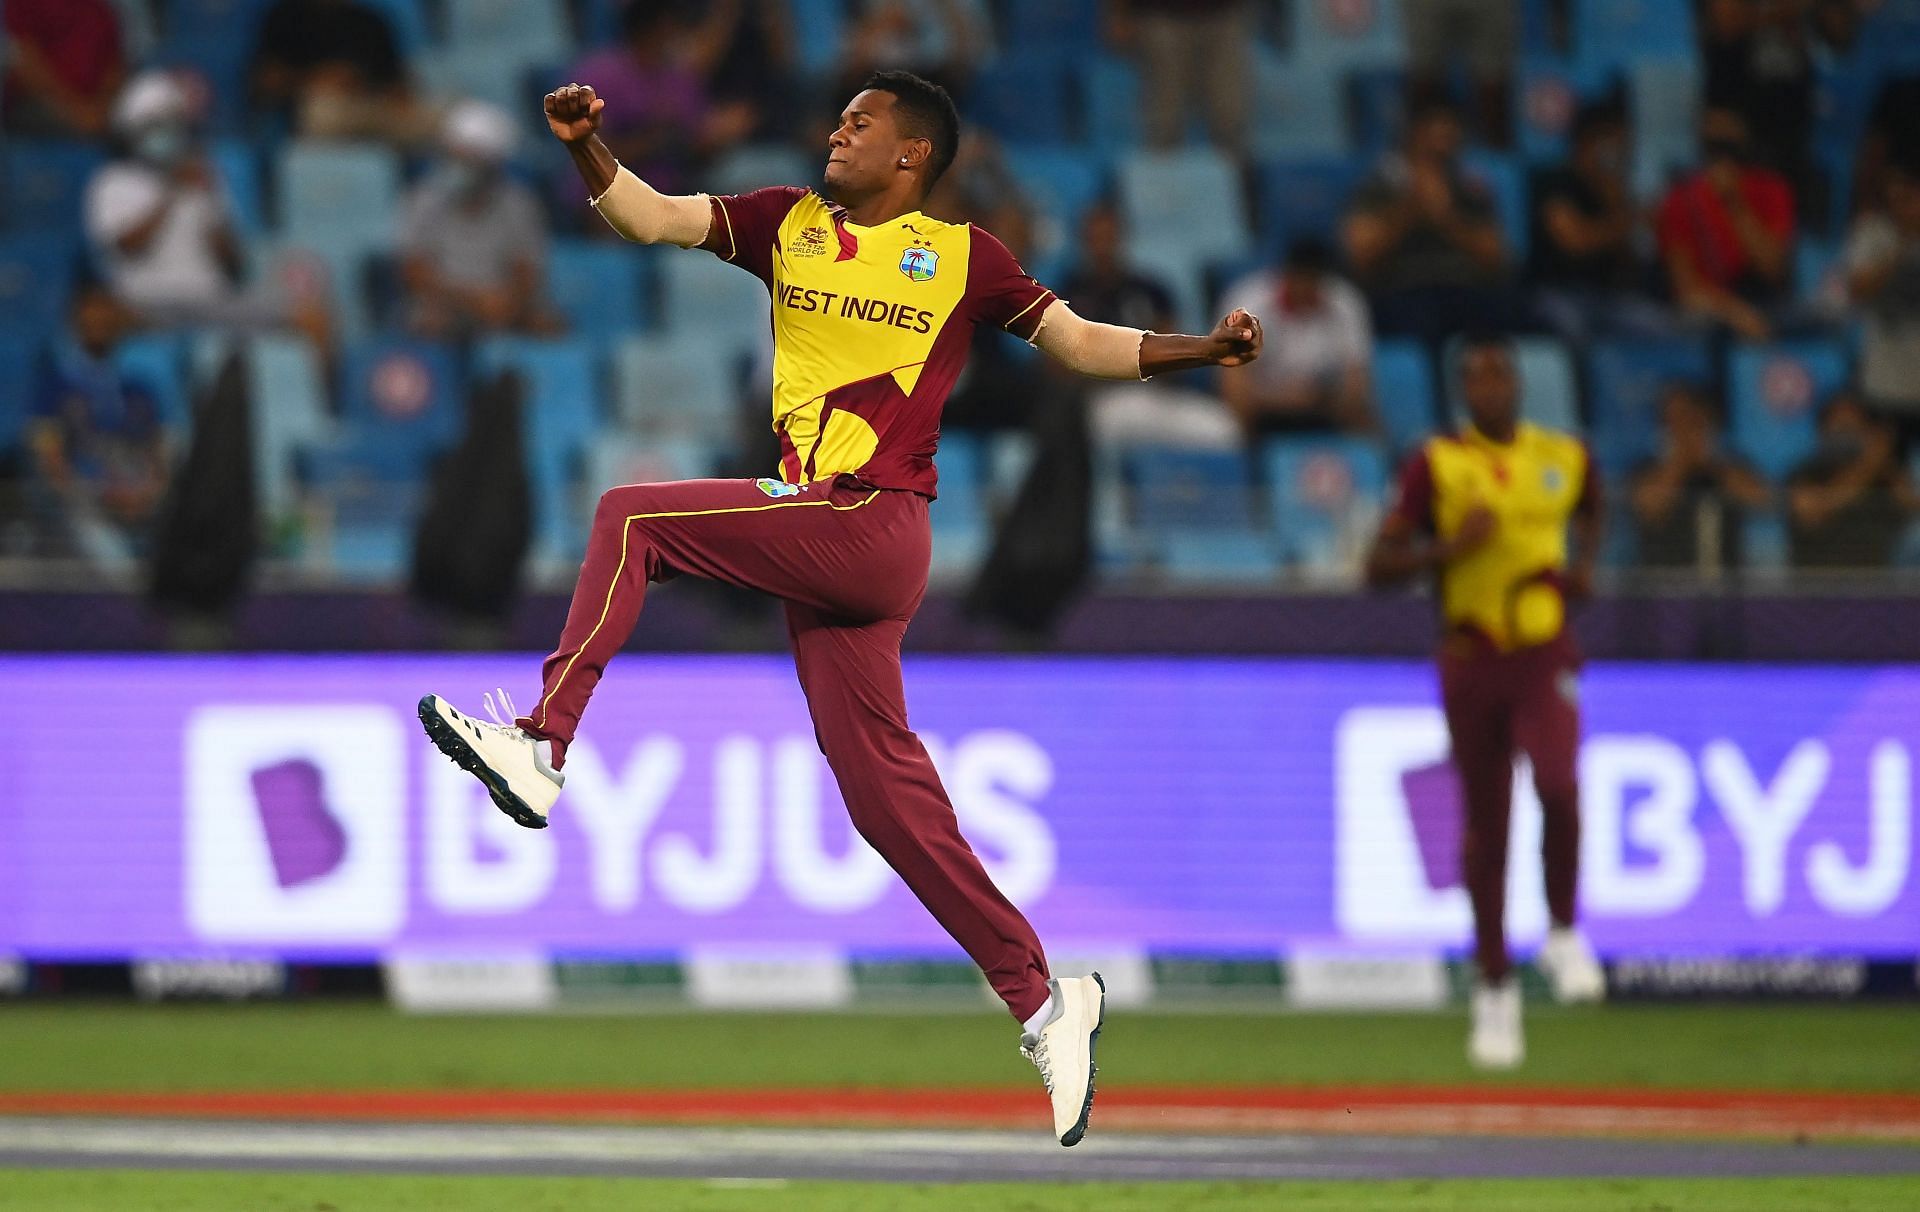 Akeal Hosein was the most successful bowler in the West Indies&#039; last match at the Dubai International Cricket Stadium